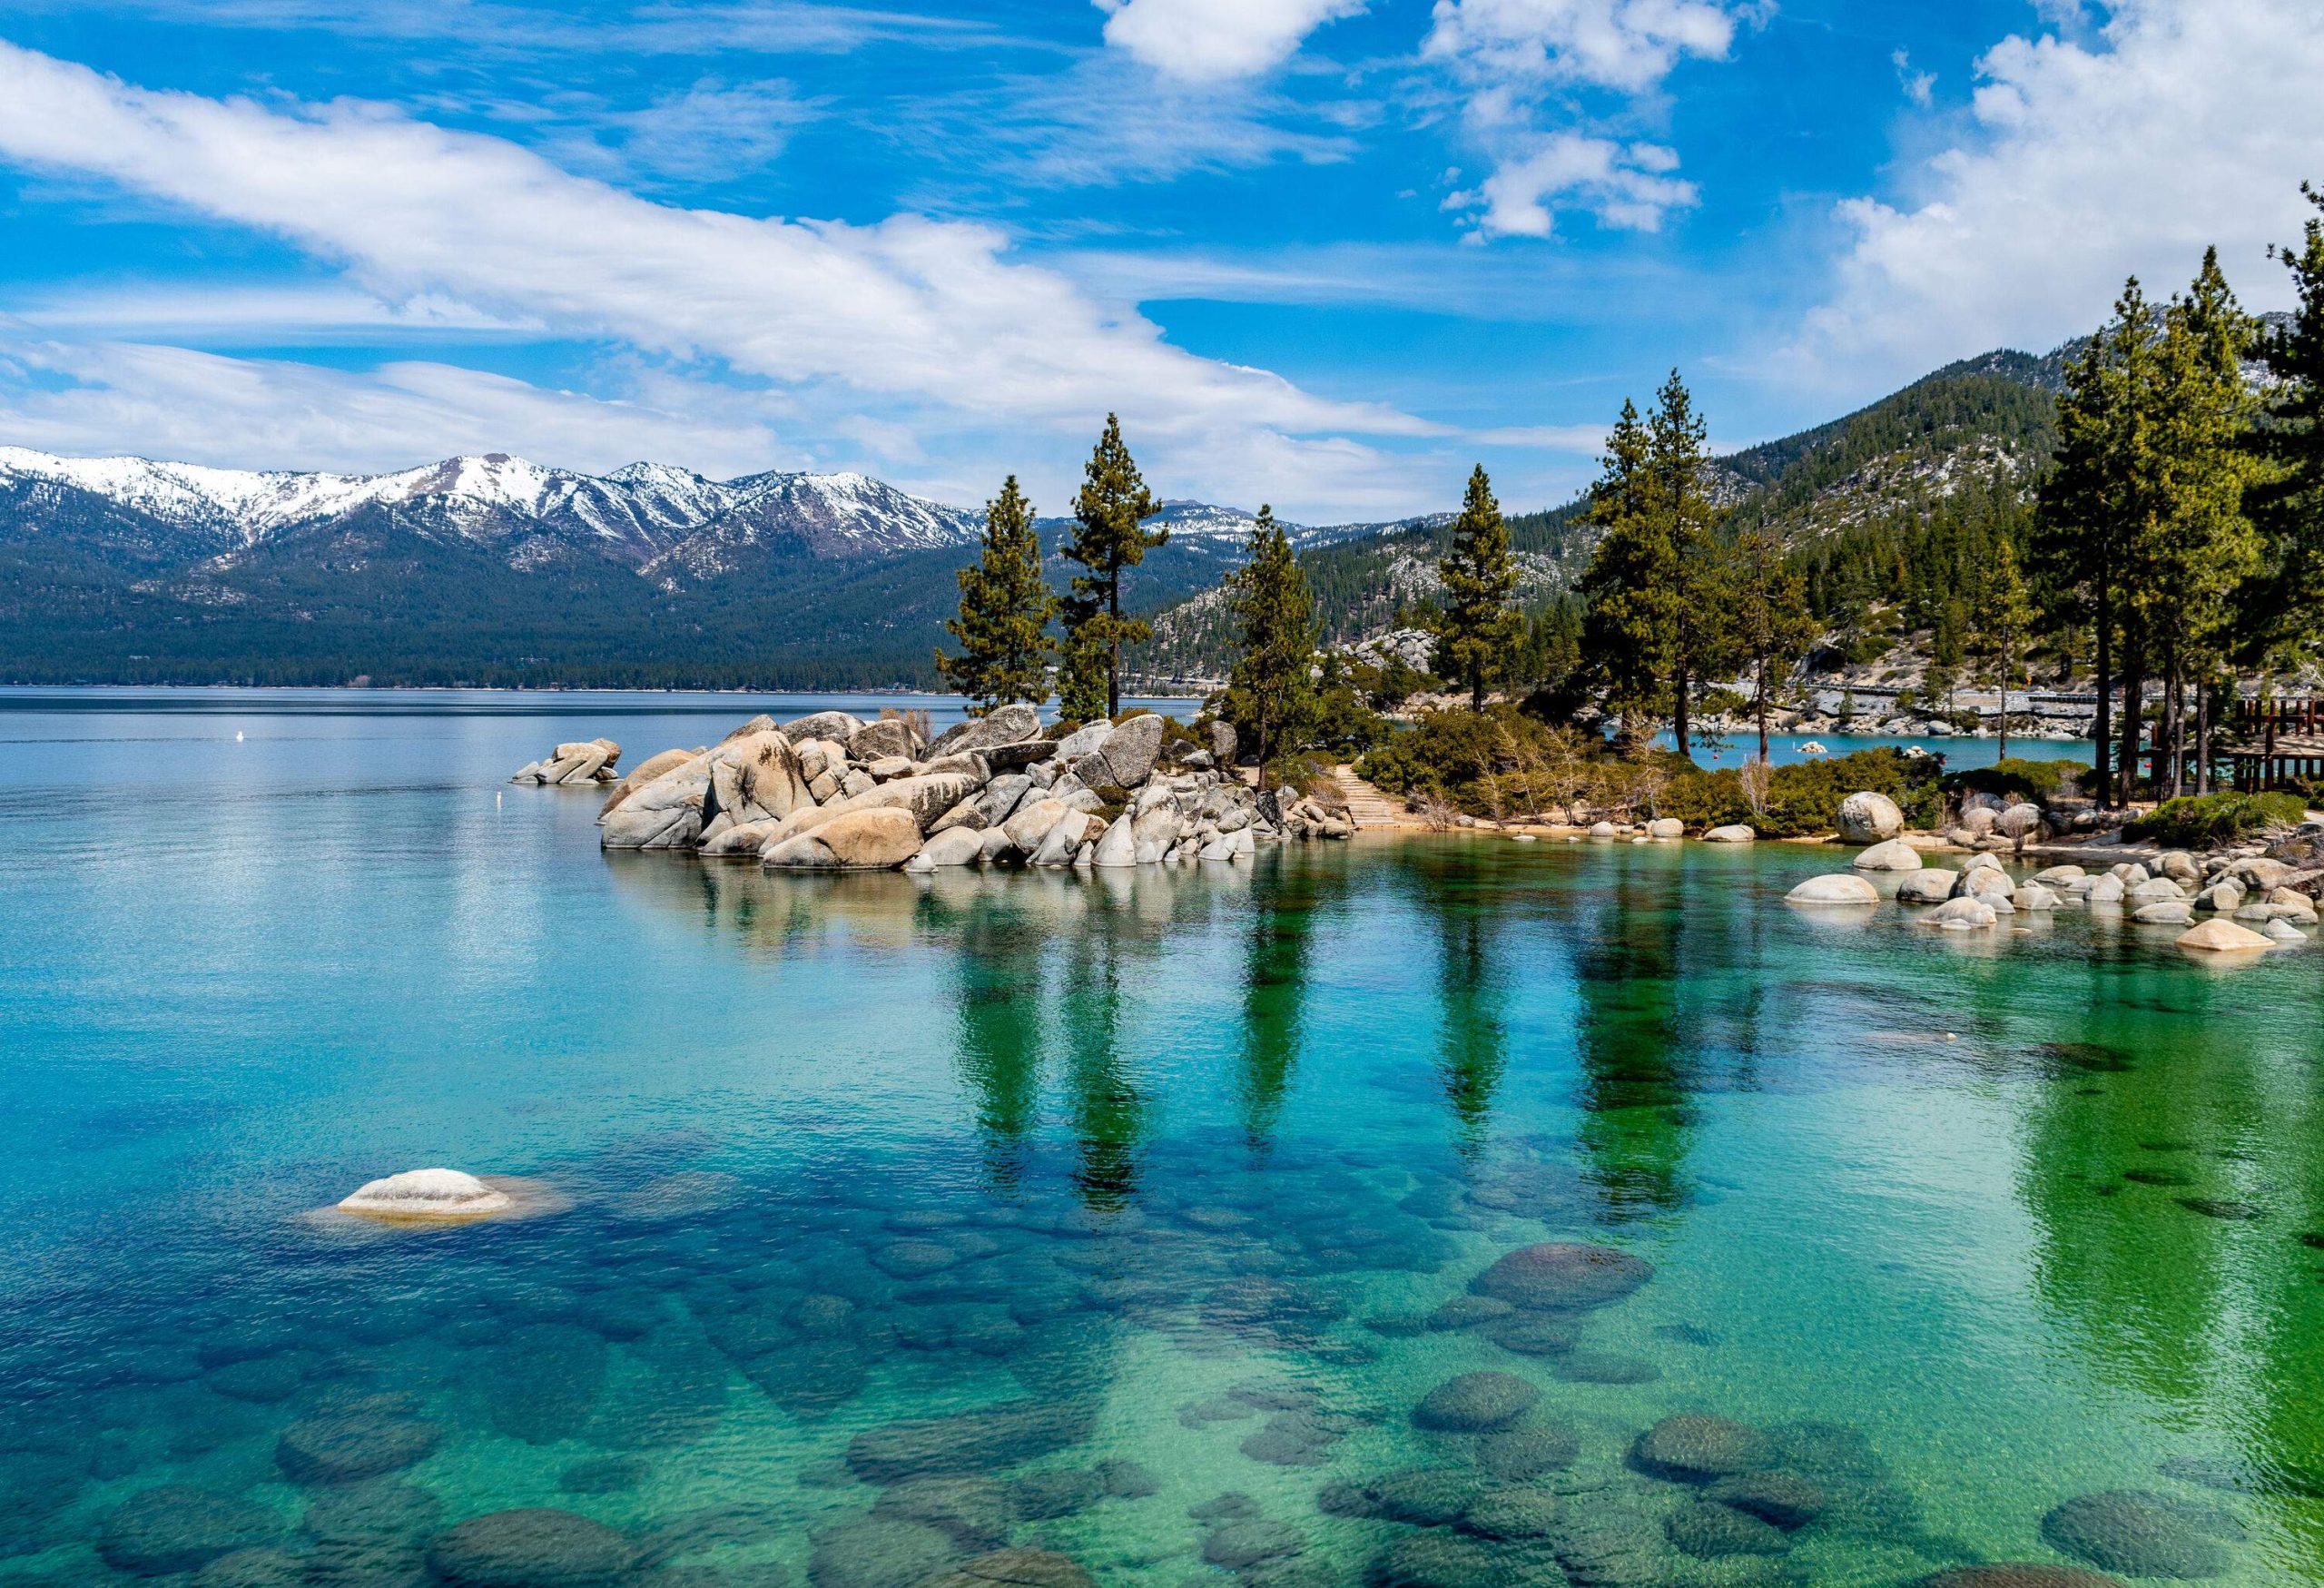 A tranquil clear water lake reflects the lined tall green trees among the boulders and the mountain range against the blue sky.